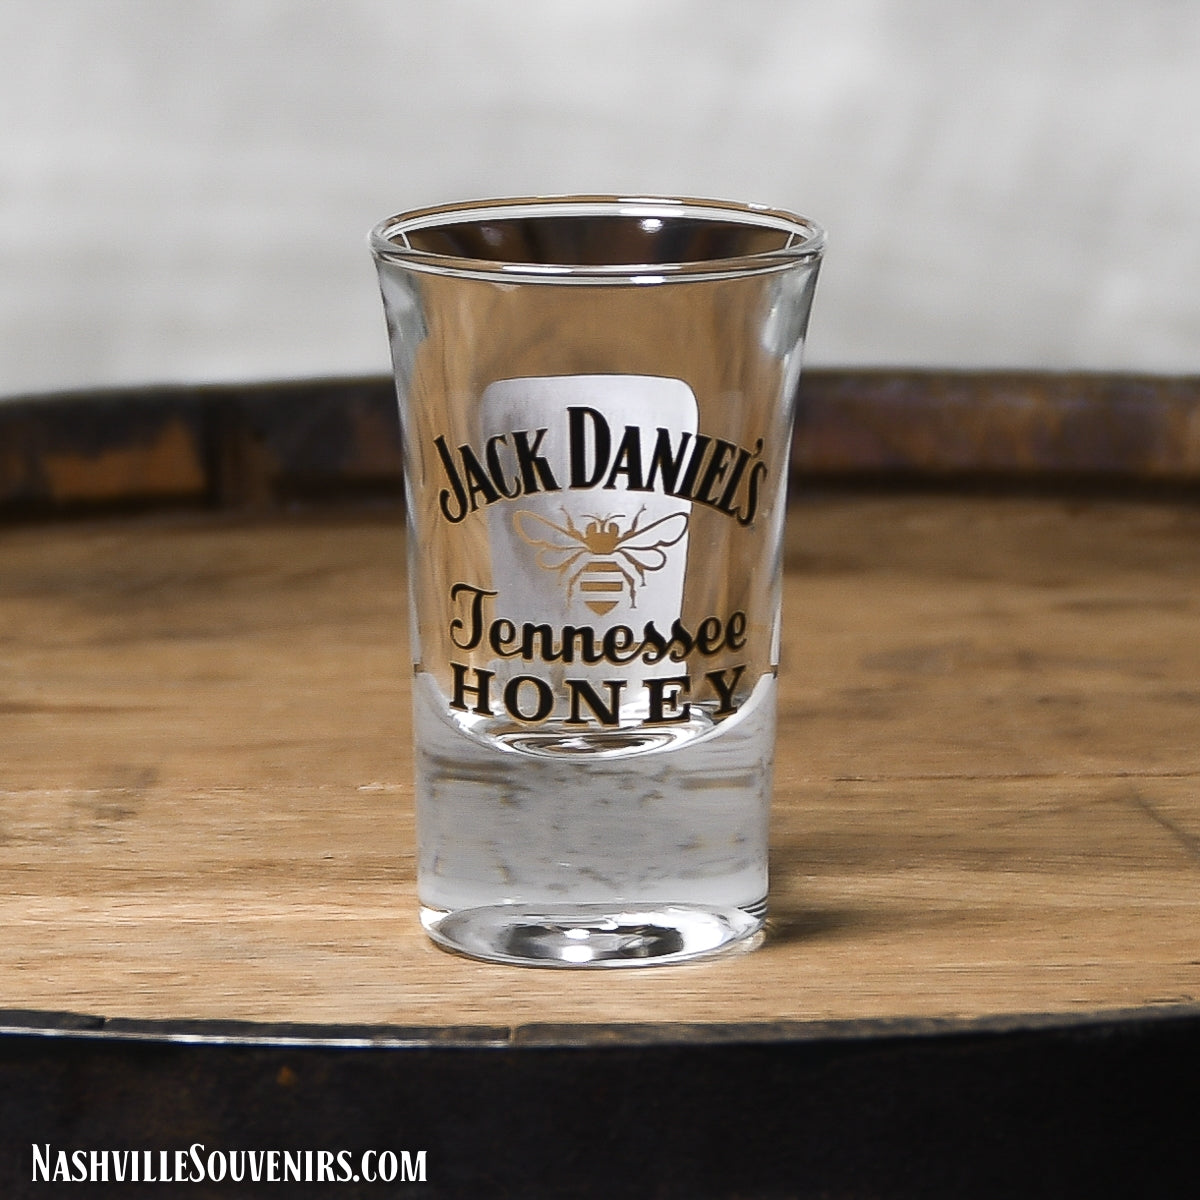 Officially licensed Jack Daniels Tennessee Honey Shot Glass. FREE SHIPPING on all US orders over $75!